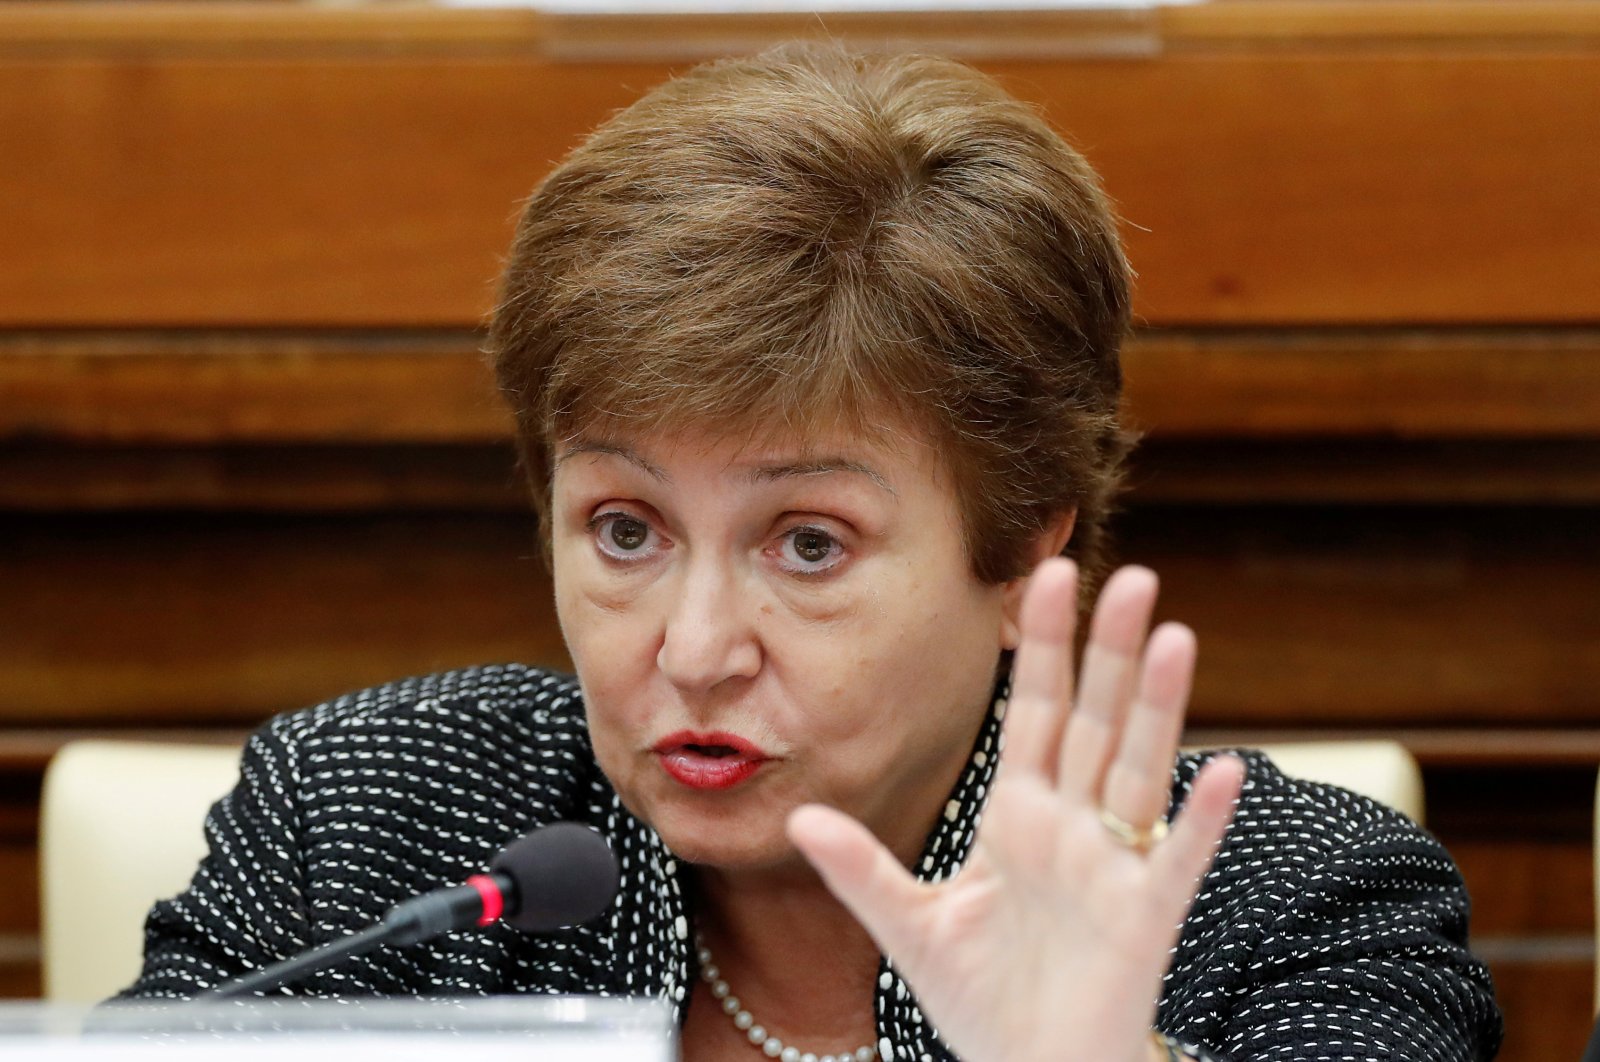 IMF Managing Director Kristalina Georgieva speaks during a conference on economic solidarity at the Vatican, Feb. 5, 2020. (REUTERS Photo)